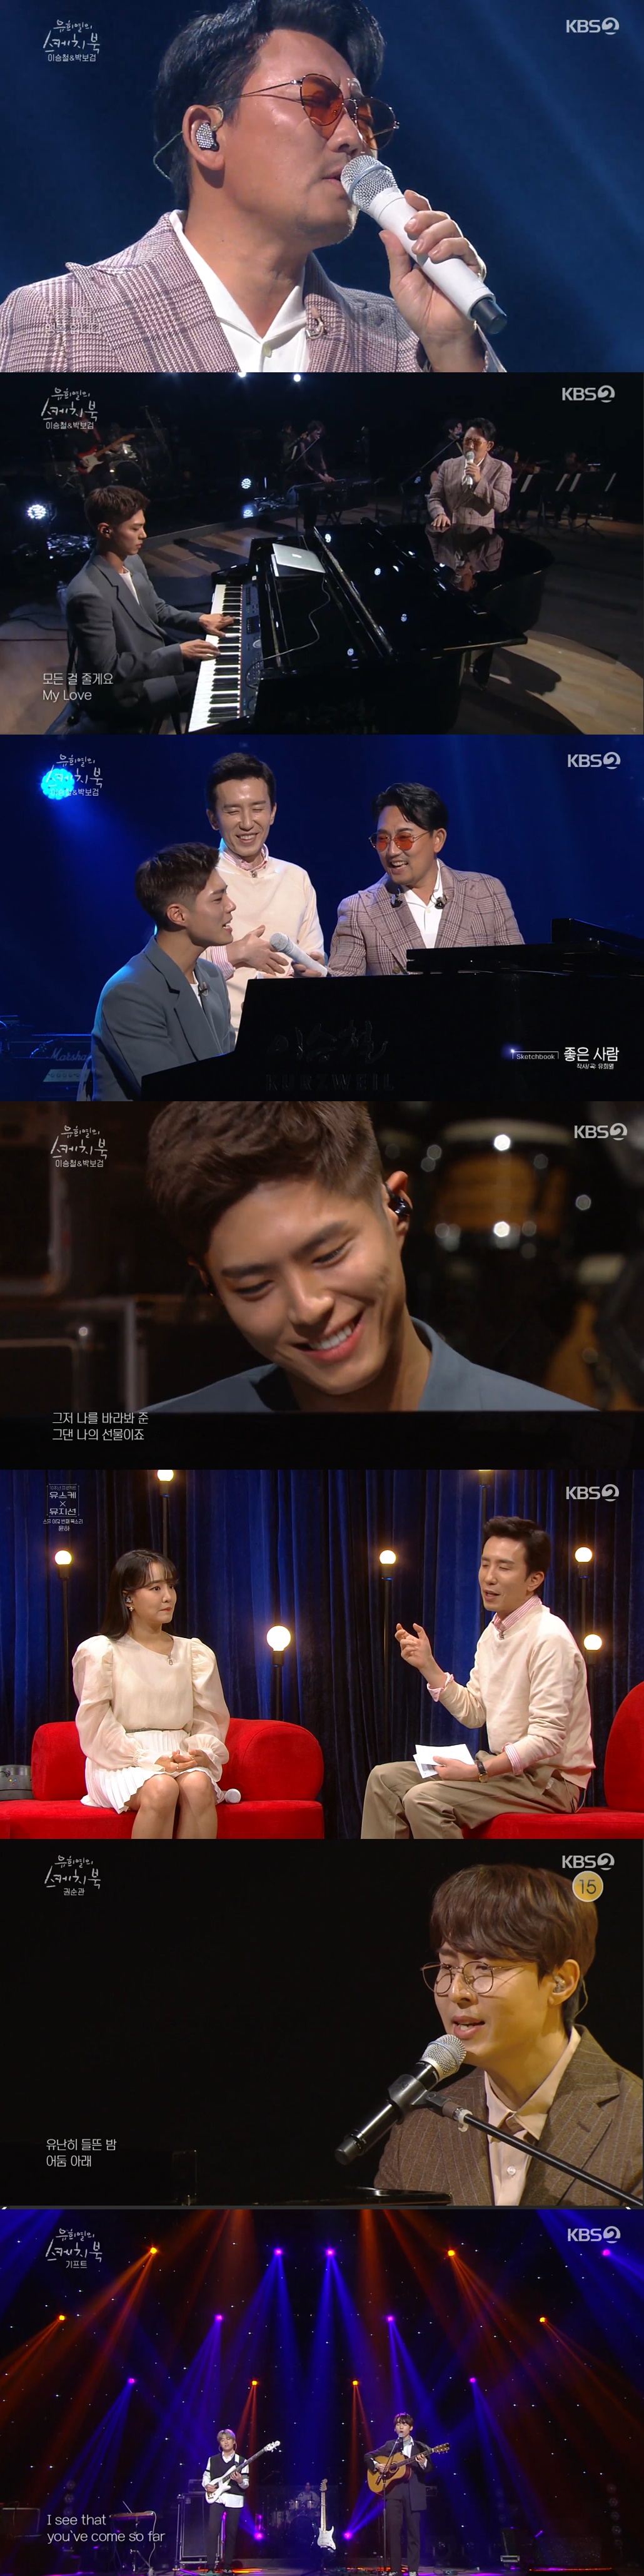 The Gift)You Hee-yeols Sketchbook actor Park Bo-gum showed Lee Su-hyuns surprise talent.In the KBS 2TV entertainment program You Hee-yeols Sketchbook, which was broadcast on the 20th, Lee Seung-cheol, Park Bo-gum, Younha, Kwon Soon-kwan and The Gift appeared to show attractive stage and talk.On the day of the broadcast, Lee Seung-cheol showed off his national singers face by playing numerous hits without accompaniment on the 35th anniversary of his debut.He explained why he recently appeared in the show, saying, I want to show it not as music, and showed off his enthusiasm to fans, saying, It is important for popular management to remind me of the parody of his buzzword Come on. The following Stage was featured by actor Park Bo-gum as a piano player and focused attention.Lee Seung-cheol and Park Bo-gum have a big gift with a special collaboration stage.Two people who have made a relationship with songs and music videos in the popular webtoon Moonlight Sculptor OST I Love You a lot announced in January this year.Park Bo-gum took on the piano accompaniment of I Love You Much and created the breath and stage of fantasy with Lee Seung-cheol.You Hee-yeol could not shut up in Park Bo-gums level piano skills and I was surprised to hit it so perfectly.At the end, I was slightly wrong and smiled, and my heart rattled when I saw it. You Hee-yeol said, I did not know that the piano was so good. Park Bo-gum called Lee Seung-cheols Western Sky and Toys Good Man to play and Love Live!Lee Seung-cheol praised Park Bo-gum for his first time in concert with Park Bo-gum, saying, I was really good at playing with the band. Park Bo-gum also expressed his gratitude to Lee Seung-cheol, who proposed this stage.Park Bo-gum, who has never participated in music videos since his debut, said, I usually liked and admired Lee Seung-cheol.In the meantime, Park Bo-gum has been a Confessions dreamer of a singer in the past.Park Bo-gum, who dreamed of being a singer-songwriter before his debut as an actor, said, I became an actor with the suggestion of my representative.However, Park Bo-gum went to graduate school as a new media music department and released it to Christmas album last winter and said that he still does not dream of Lee Su-hyun.It has been attracting attention as it remade the remake of Lets go to the stars of the previous years loading.Lee Seung-cheol, who heard the song again by Park Bo-gum, praised it for good voice; I pick these people during auditions.Park Bo-gum said, We are currently preparing a project with SAM KIM of Antenna Music. Confessions made Lee Su-hyun Park Bo-gum look forward to it.I am currently preparing a project with SAM KIM of Antenna Music, so I expected Park Bo-gum to transform into Lee Su-hyun.In particular, Park Bo-gum was surprised by You Hee-yeols Sketchbook MC with the suggestion of Lets try 2MC by recalling memories of Music Bank in the past and boasted a perfect breath by introducing Lee Seung-cheols Nobody elseIn addition, Younha, the rainy goddess of the music industry, arranged the R & B king Yoon Mi-rae Forget it... in the modern rock style of the 2000s and performed a wonderful stage.The last time, the band The Gift finished the stage with a so-called I have never drank fine dust tone.